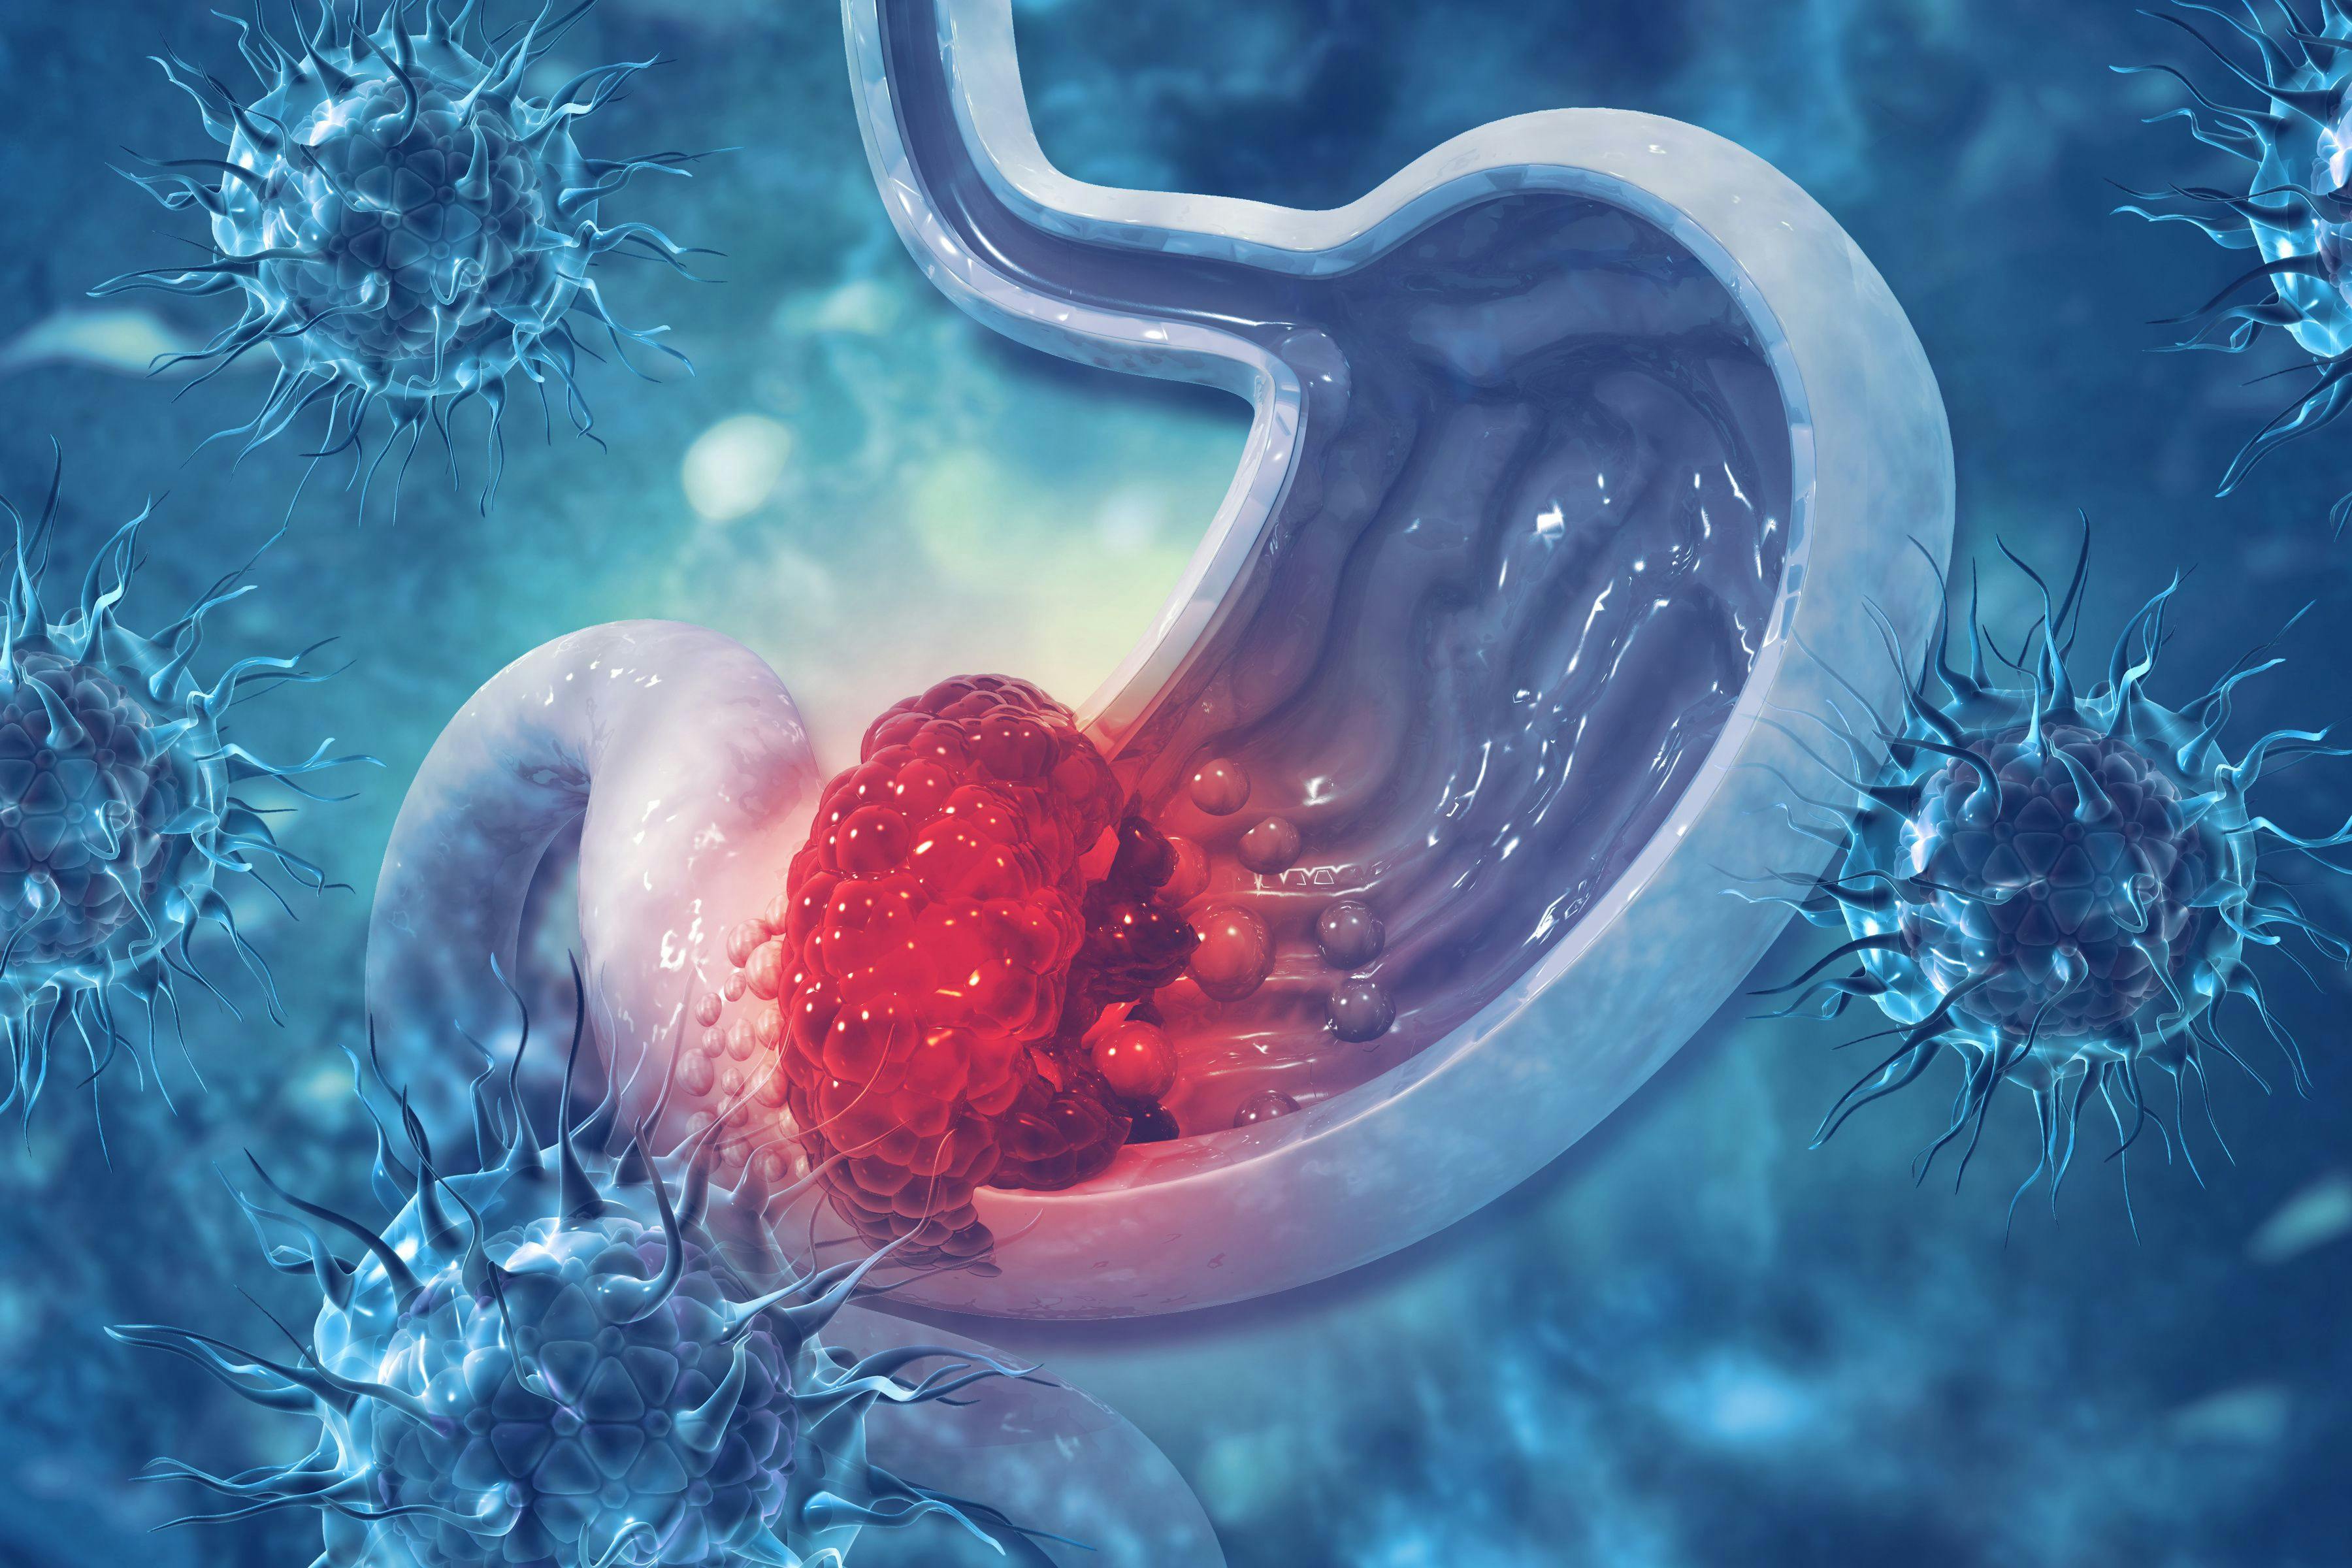 Stomach cancer. Cancer attacking cell. Stomach disease concept - Image Credit © Crystal light | stock.adobe.com